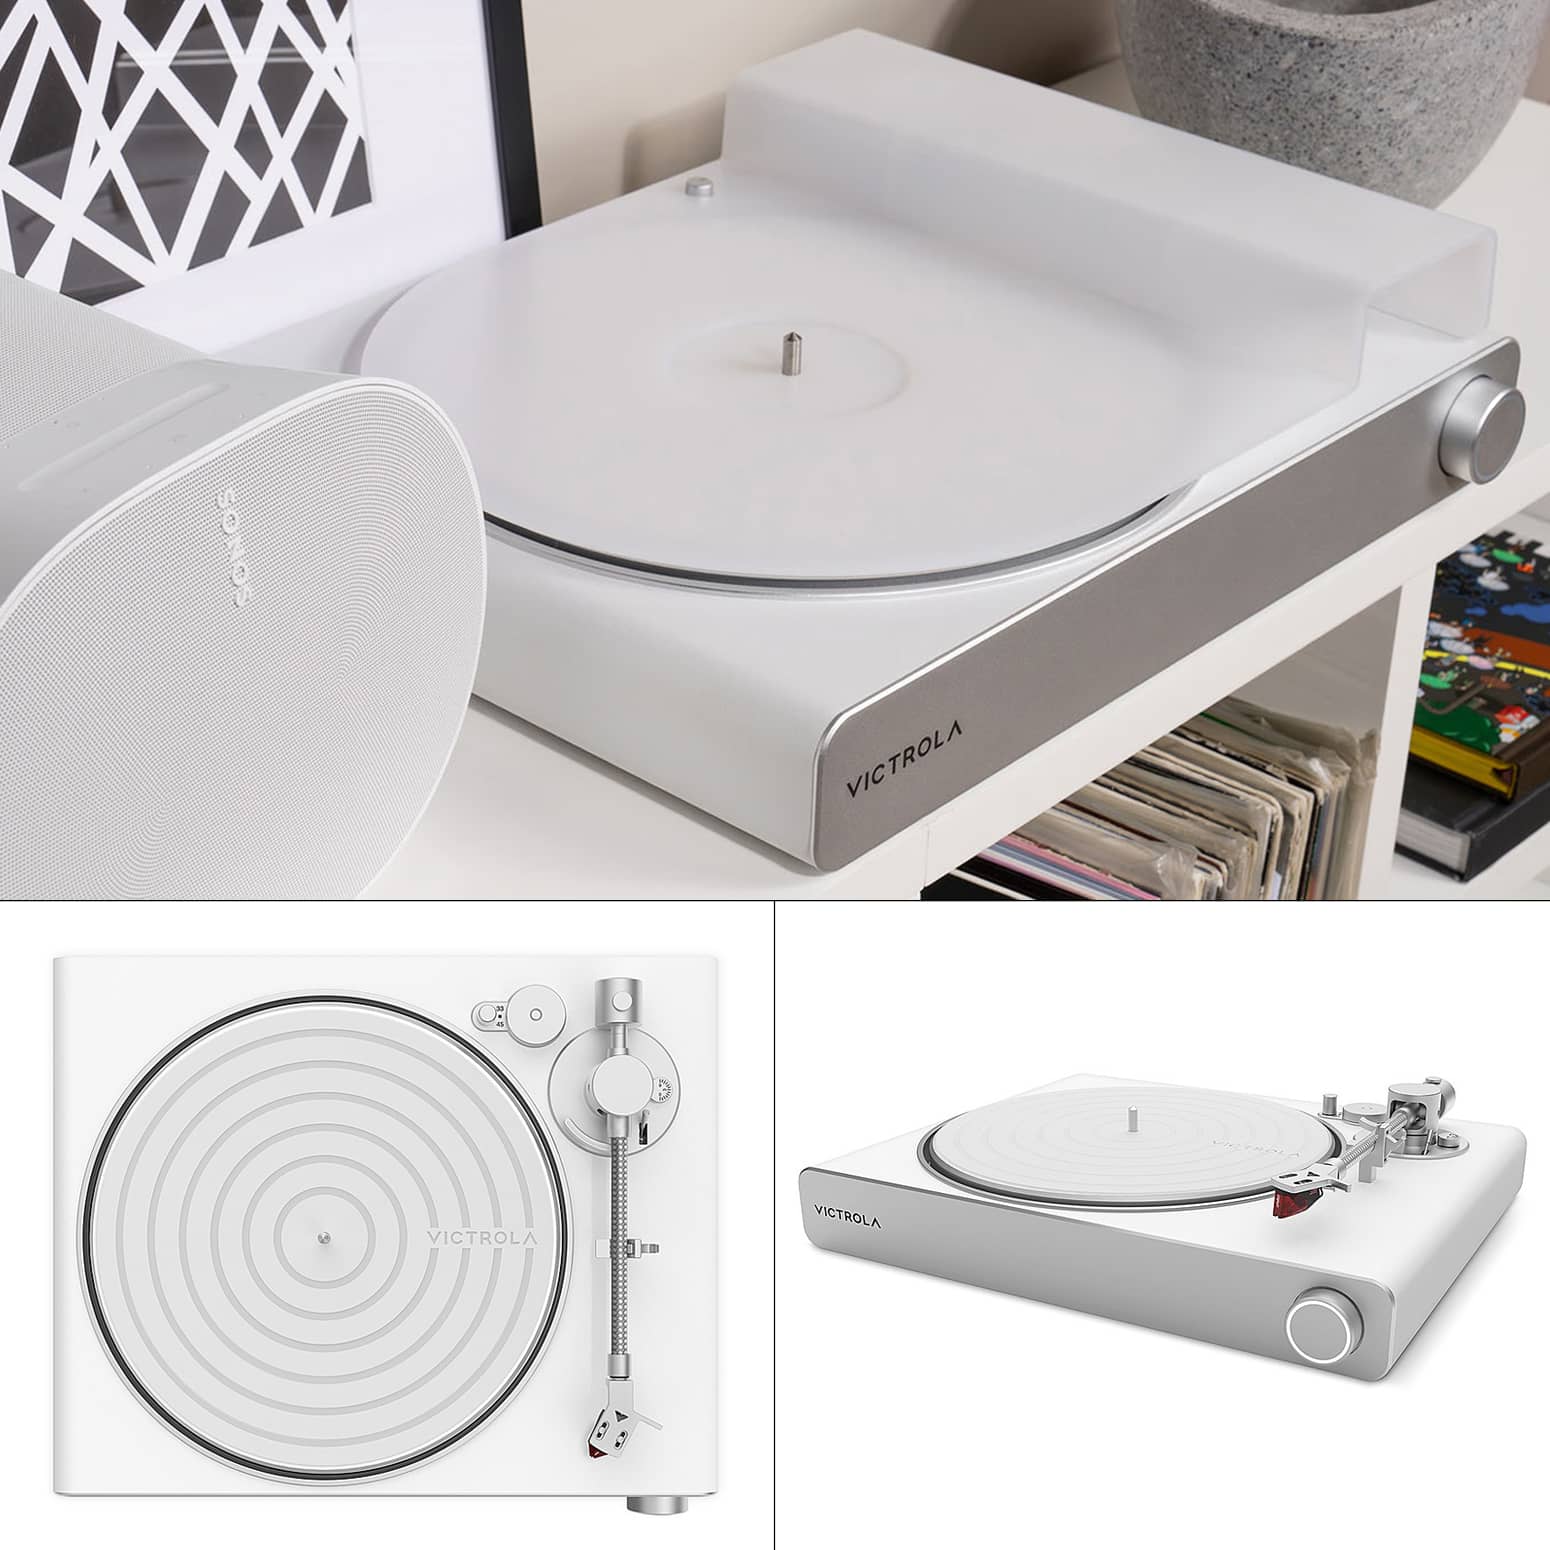 Victrola Stream Turntable - Works with Sonos Wirelessly